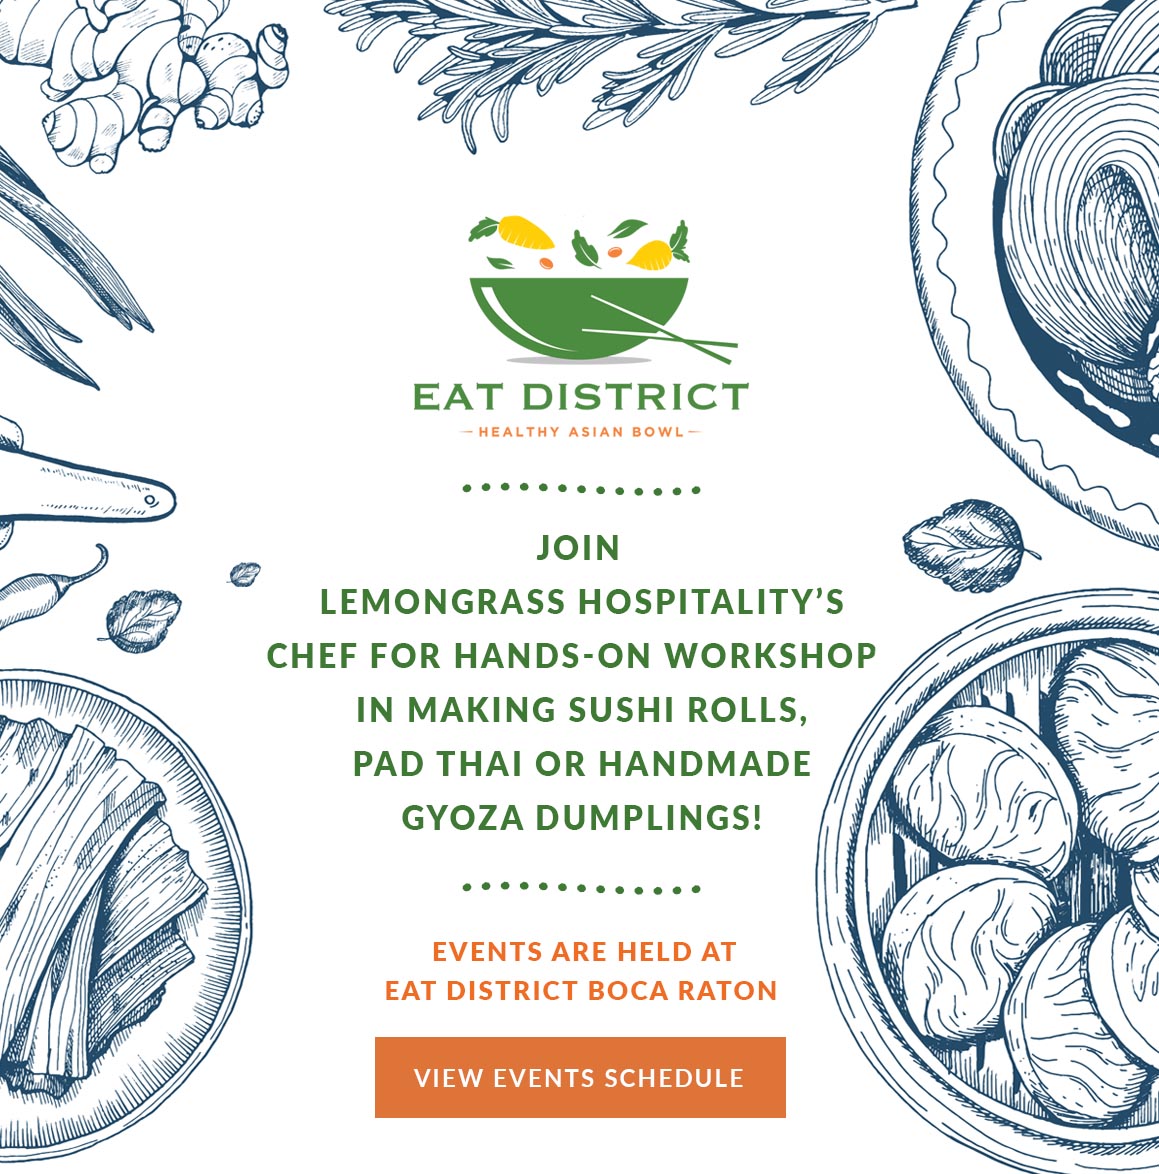 Events at Eat District Boca Raton